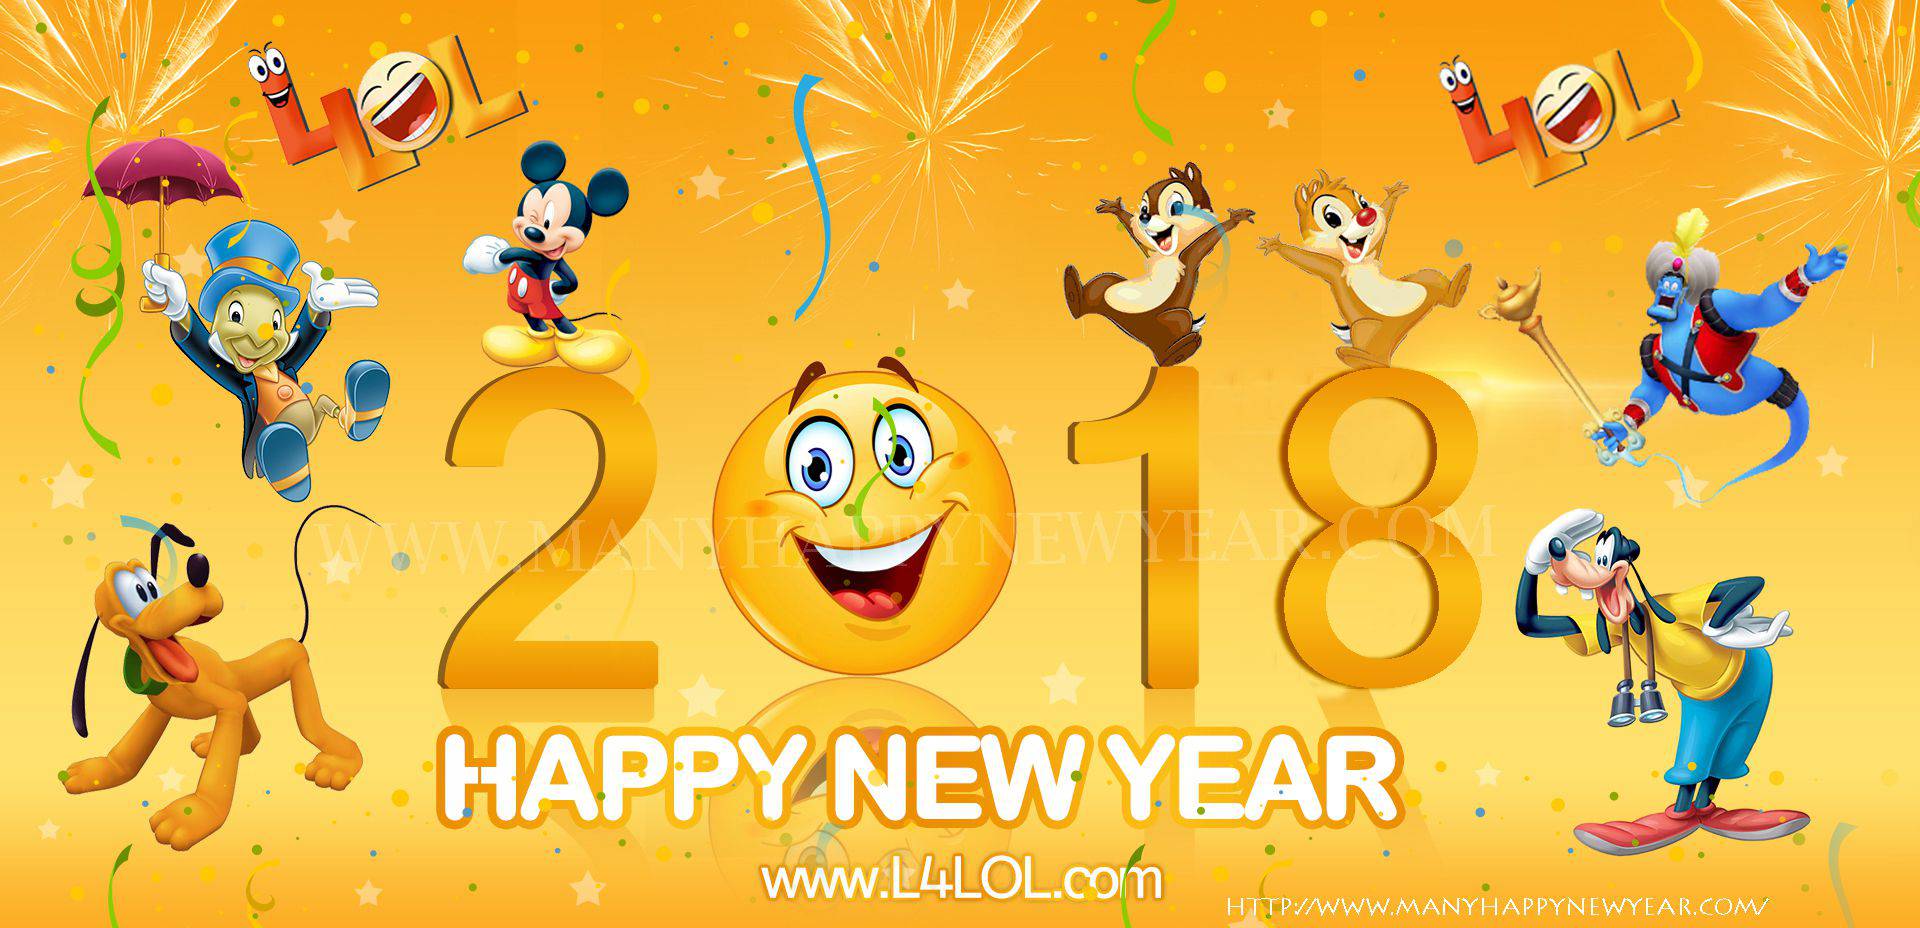 New Year 2018: New Year 2018